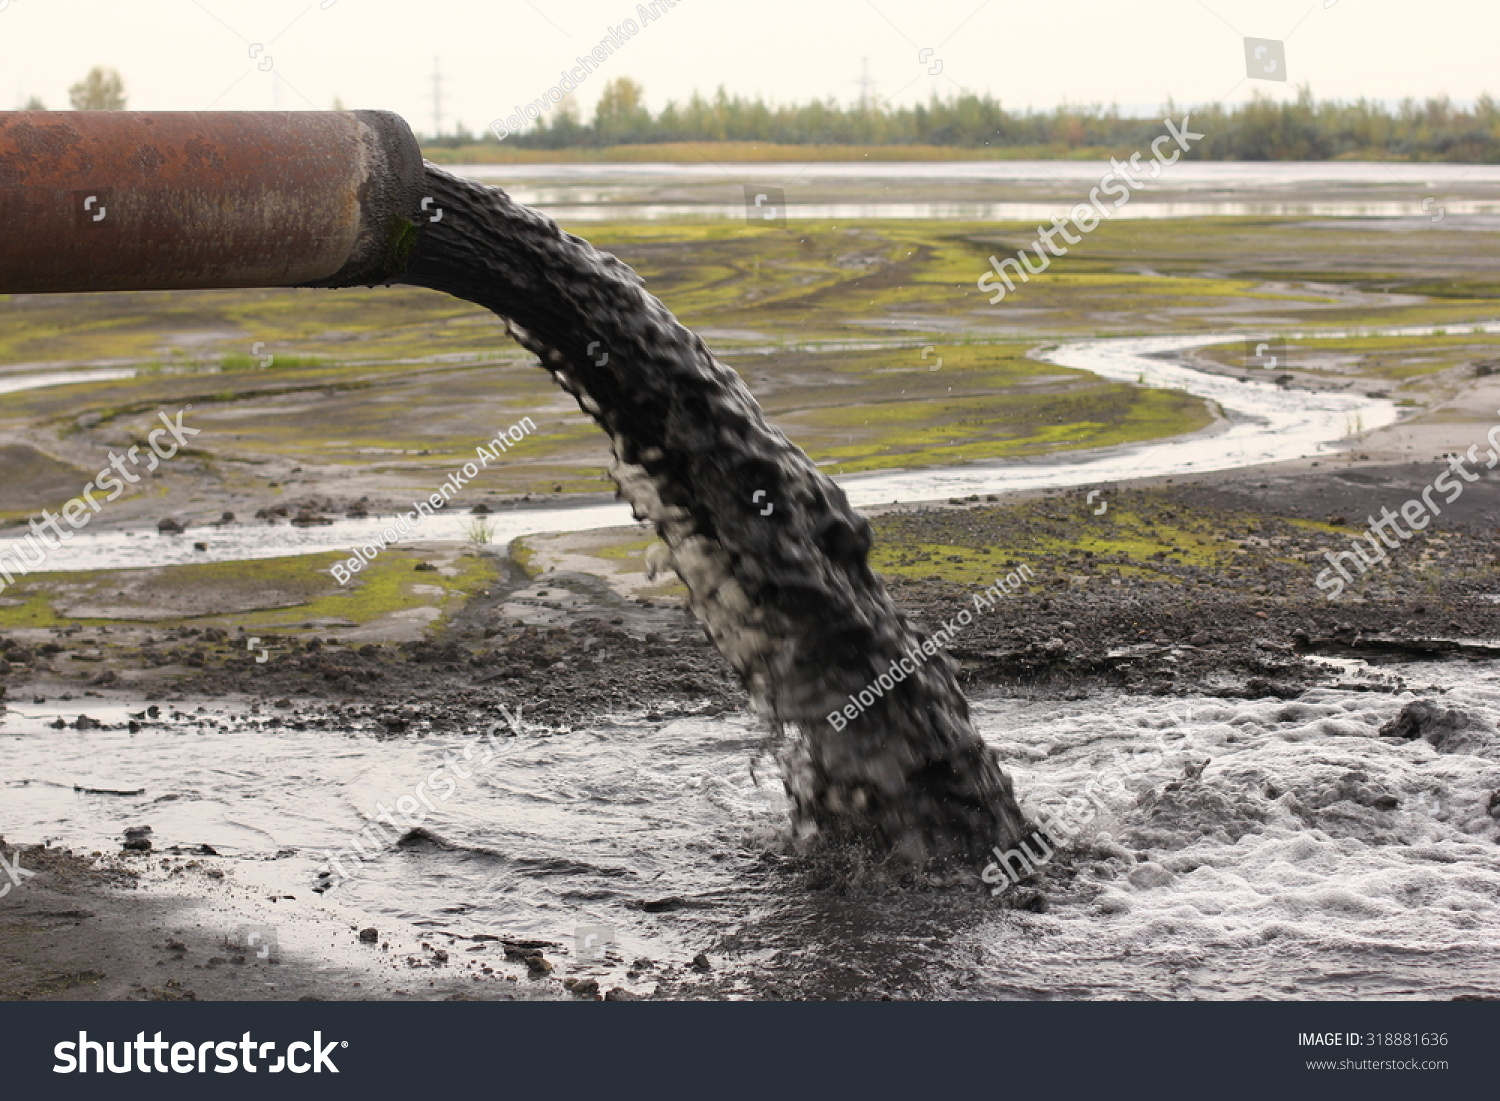 Dirty Water Discharged Into River Stock Photo 318881636 : Shutterstock